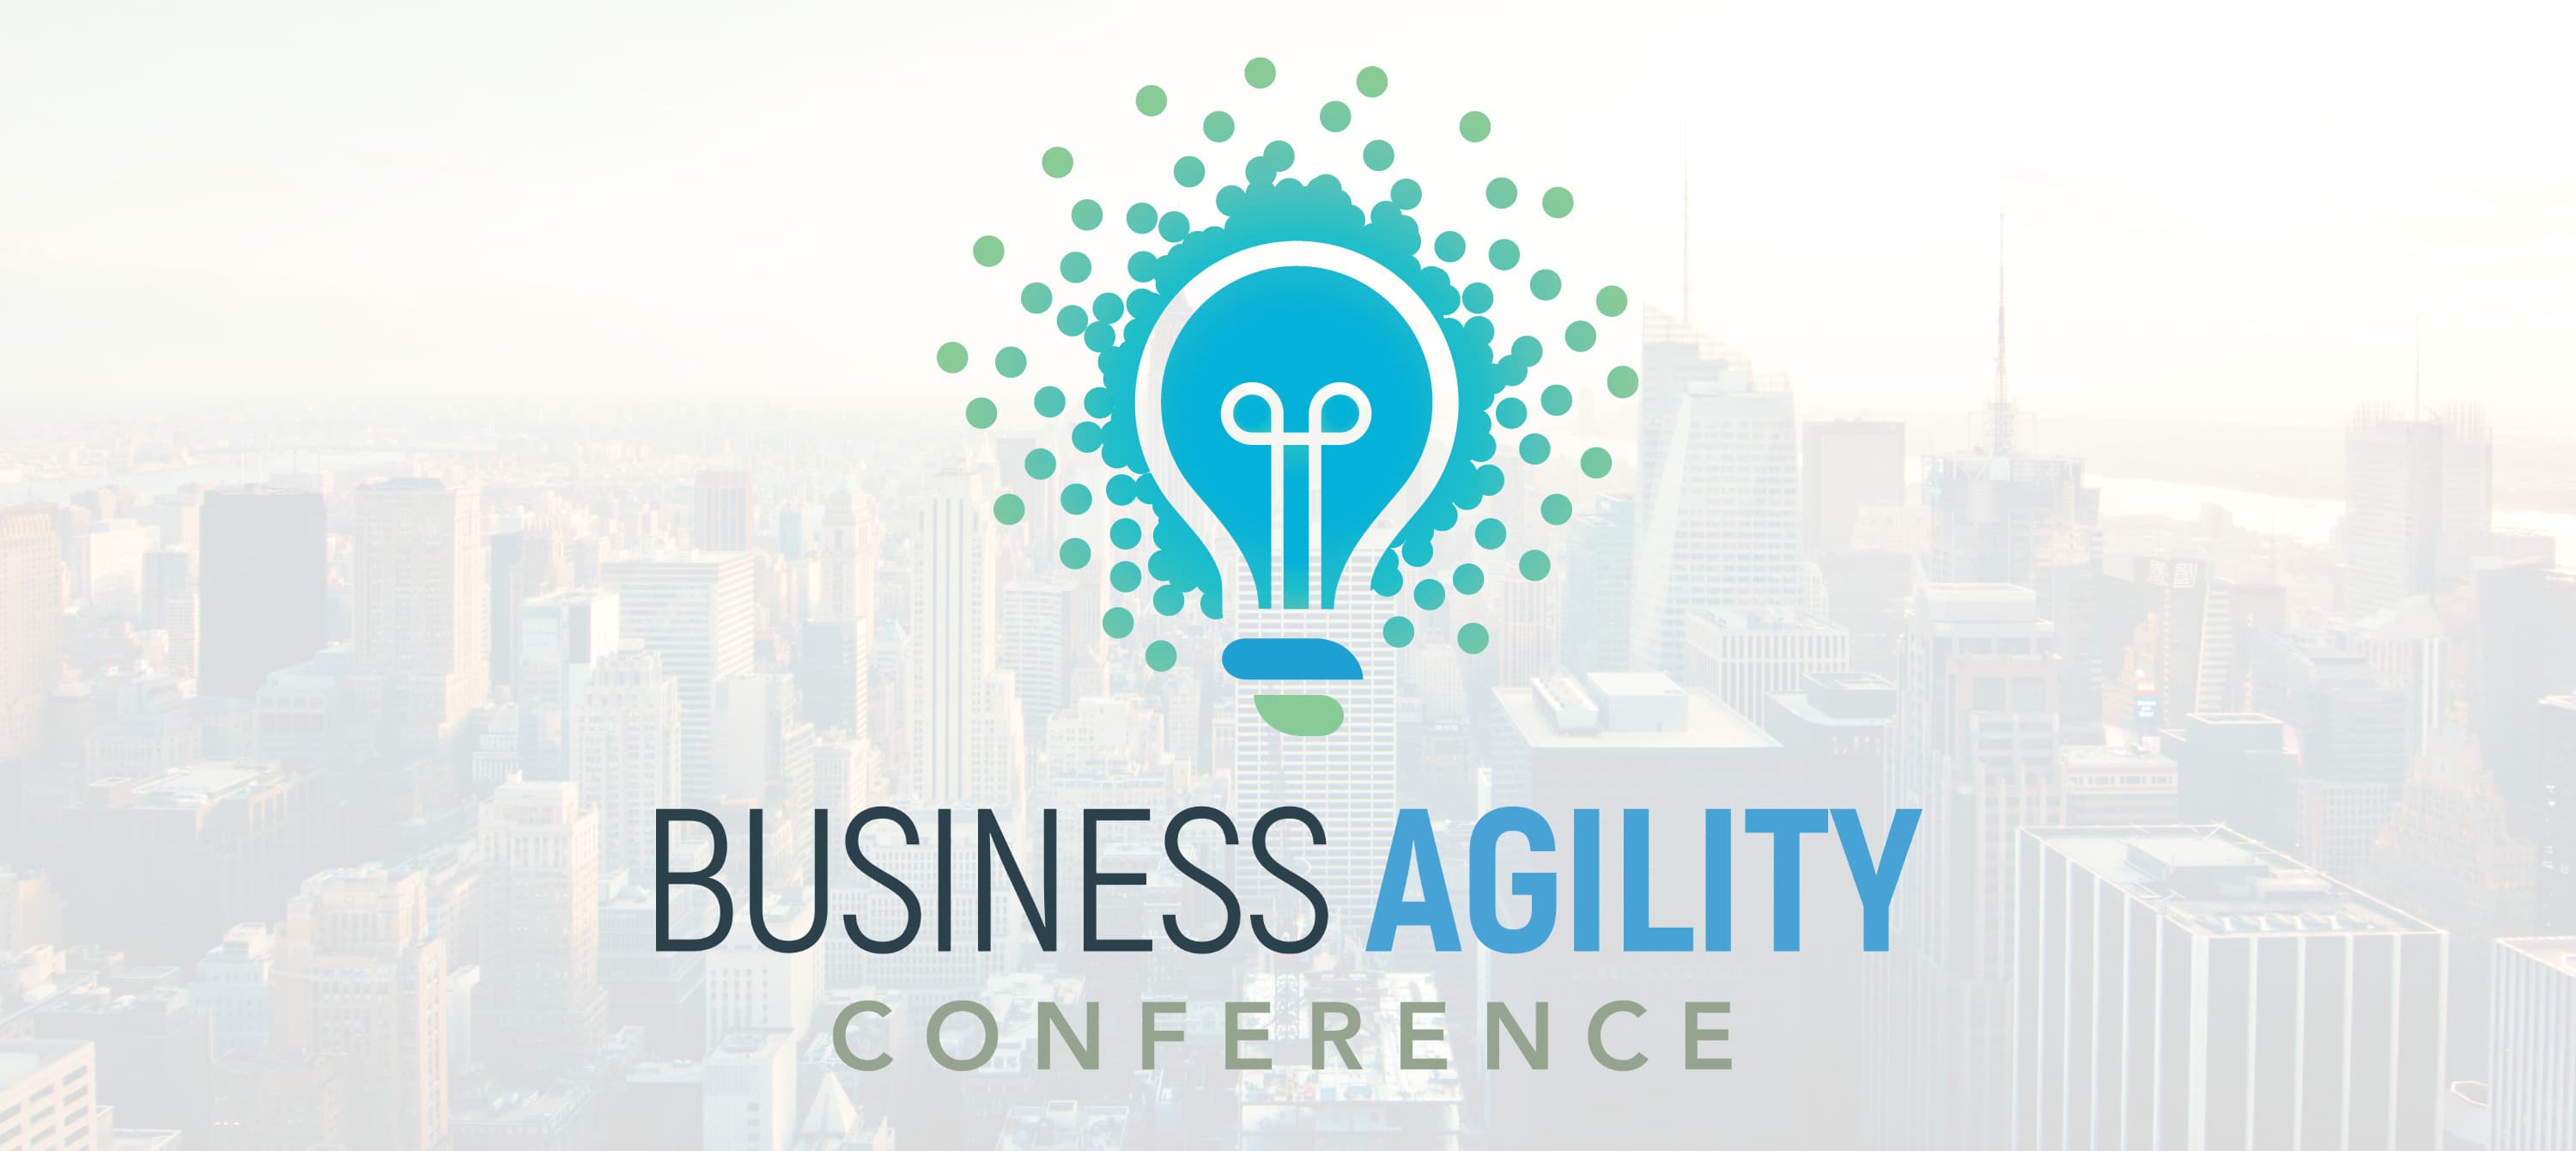 Important announcement regarding the 2021 Business Agility Conference